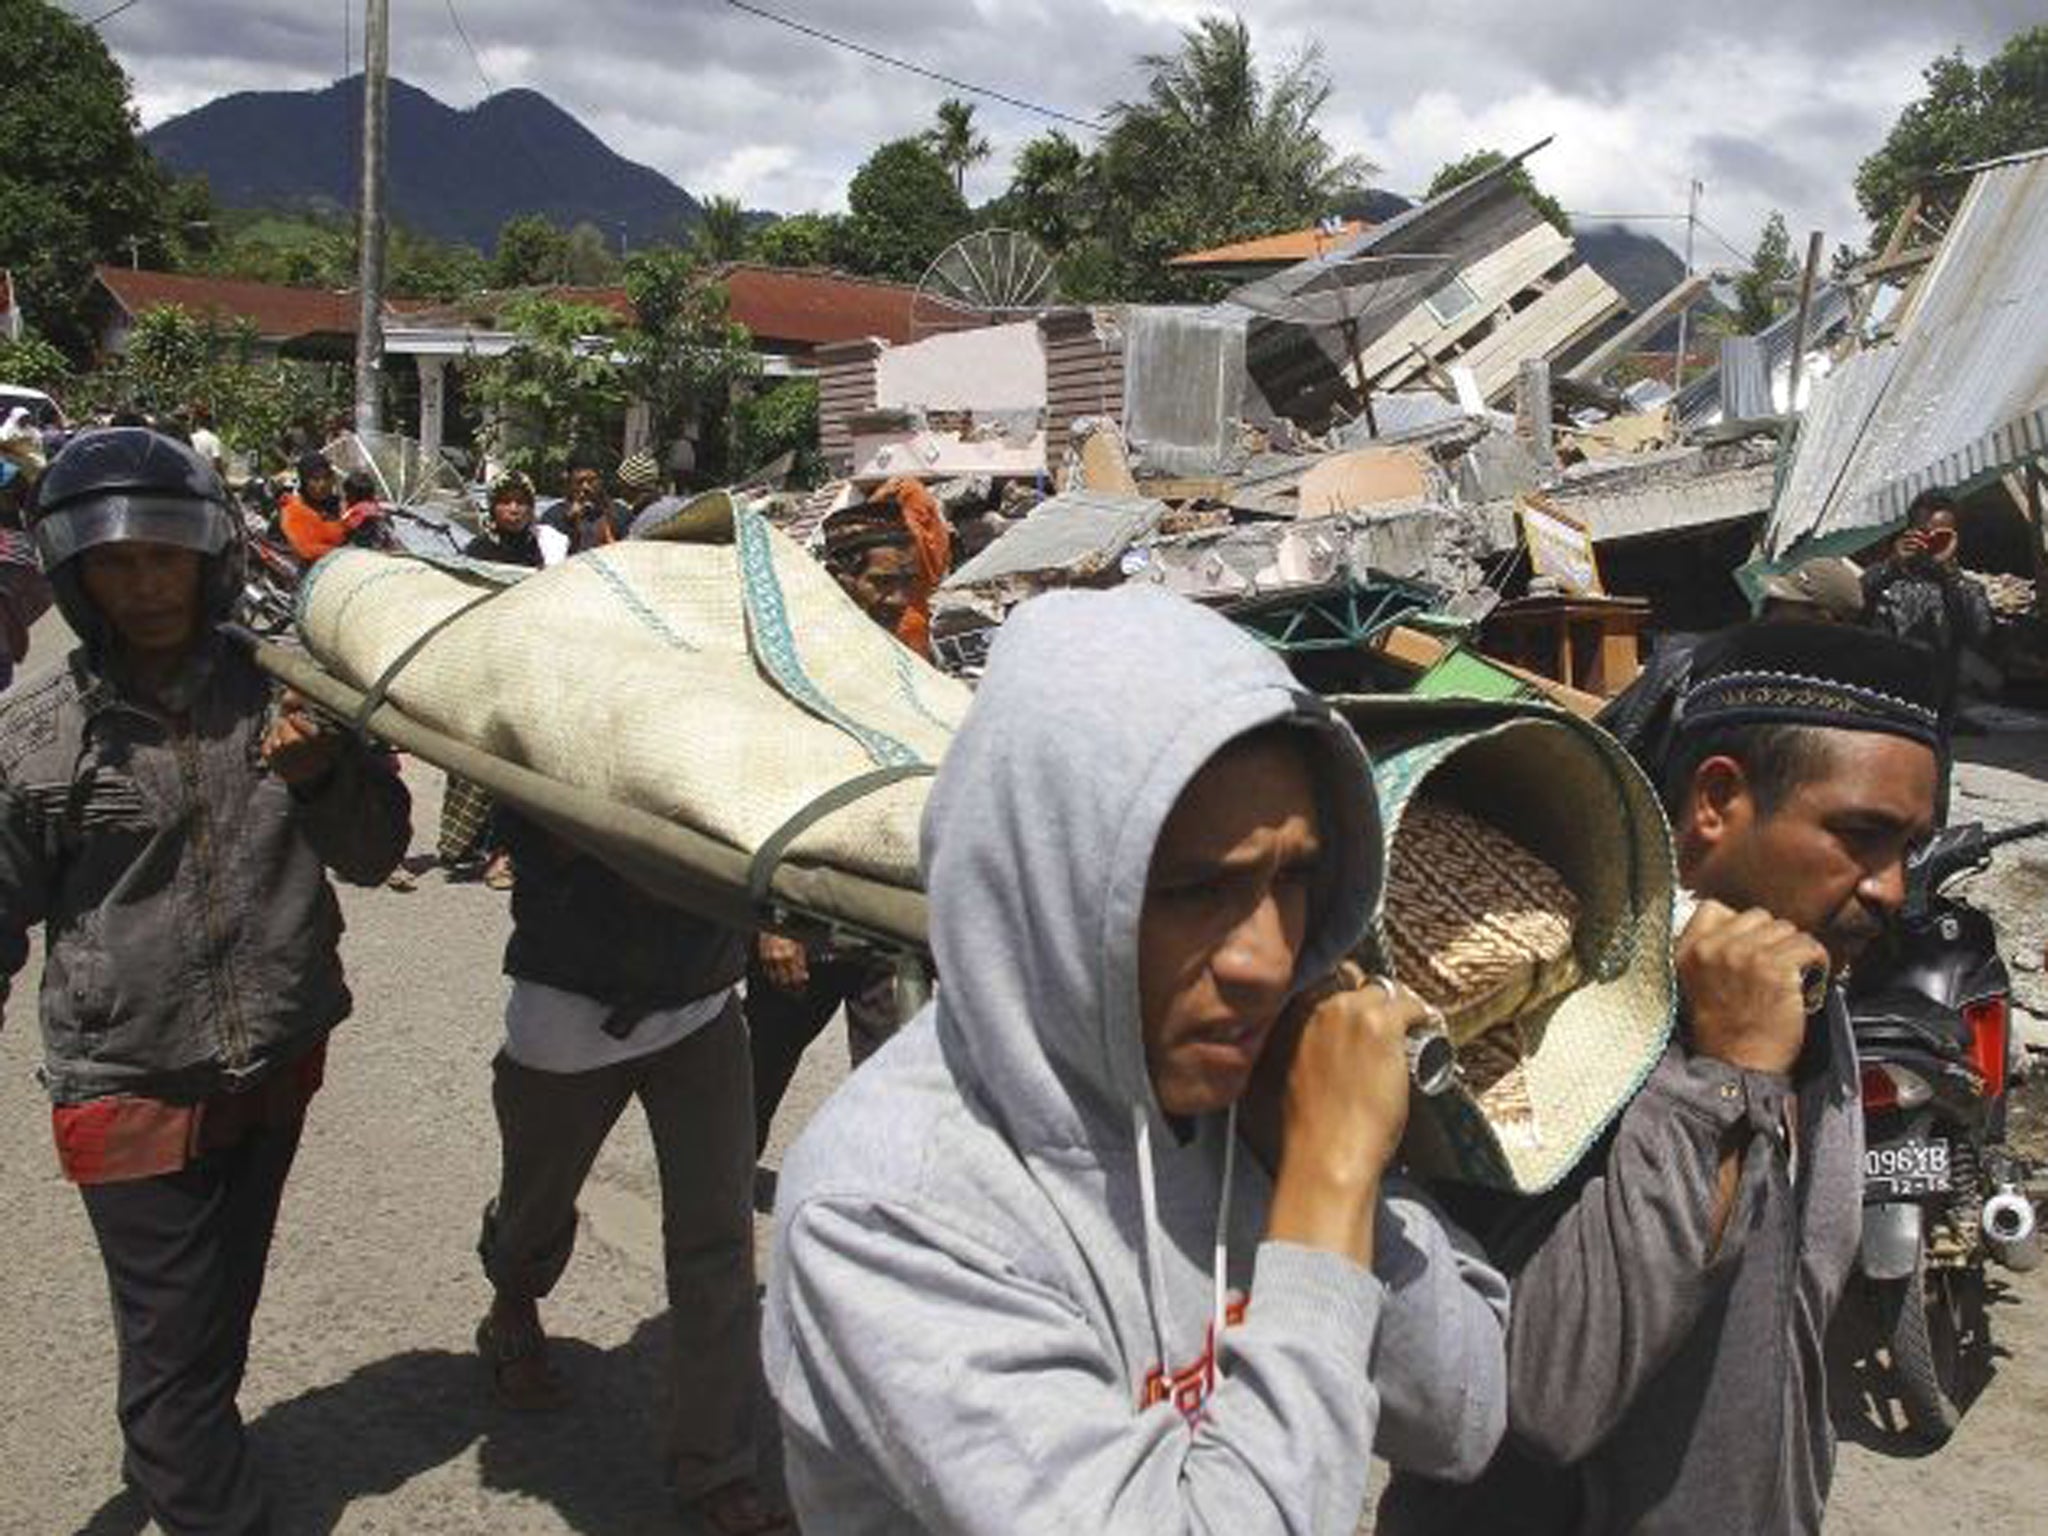 Residents carry the body of their relatives for funeral in Blang Mancung village after a 6.1 magnitude earthquake hit Aceh province